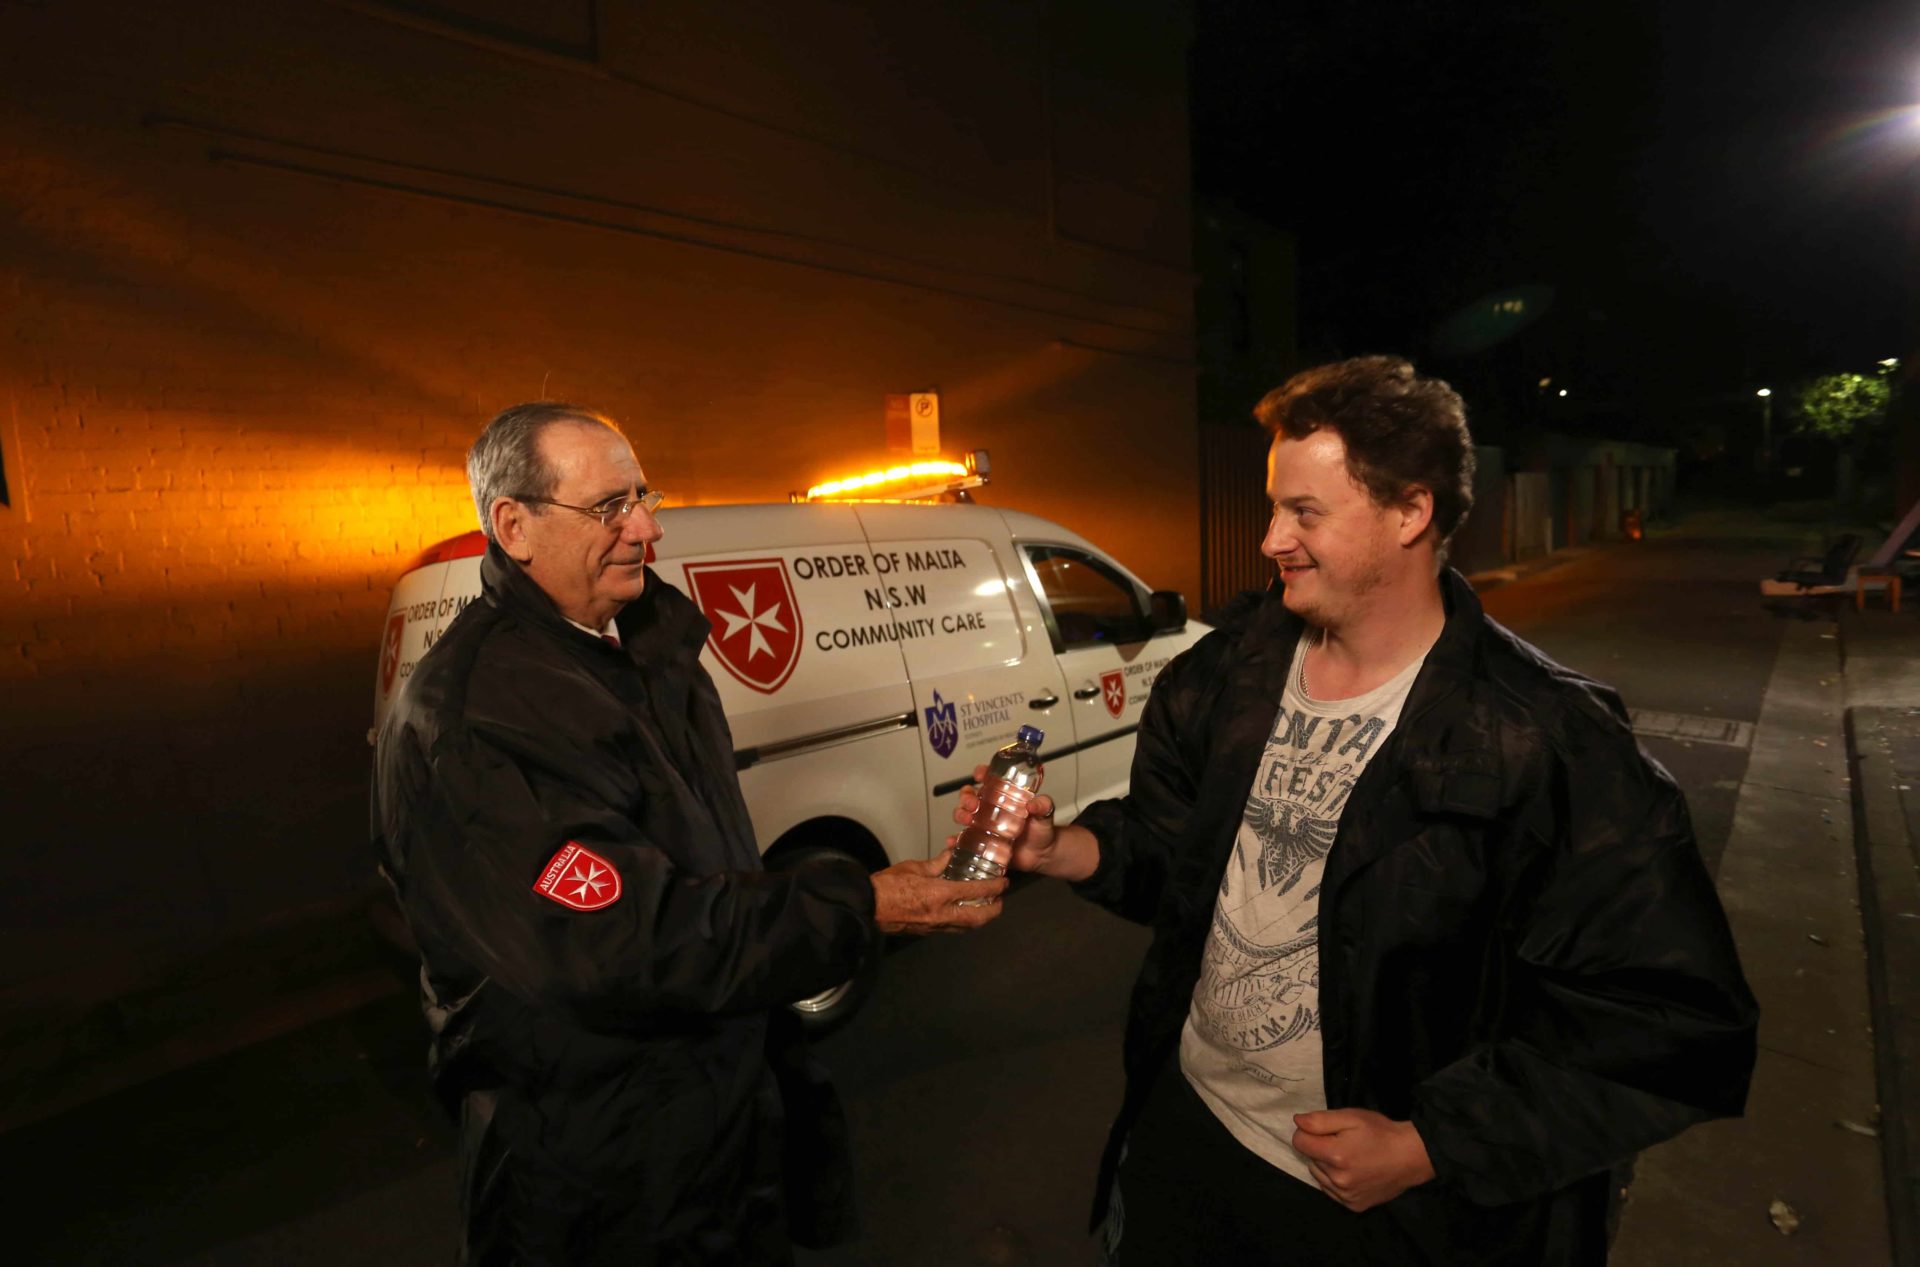 David Hall of the Order of Malta, pictured here distributing Coats for the Homeless, is now turning his sights on sun protection for the homeless this summer.